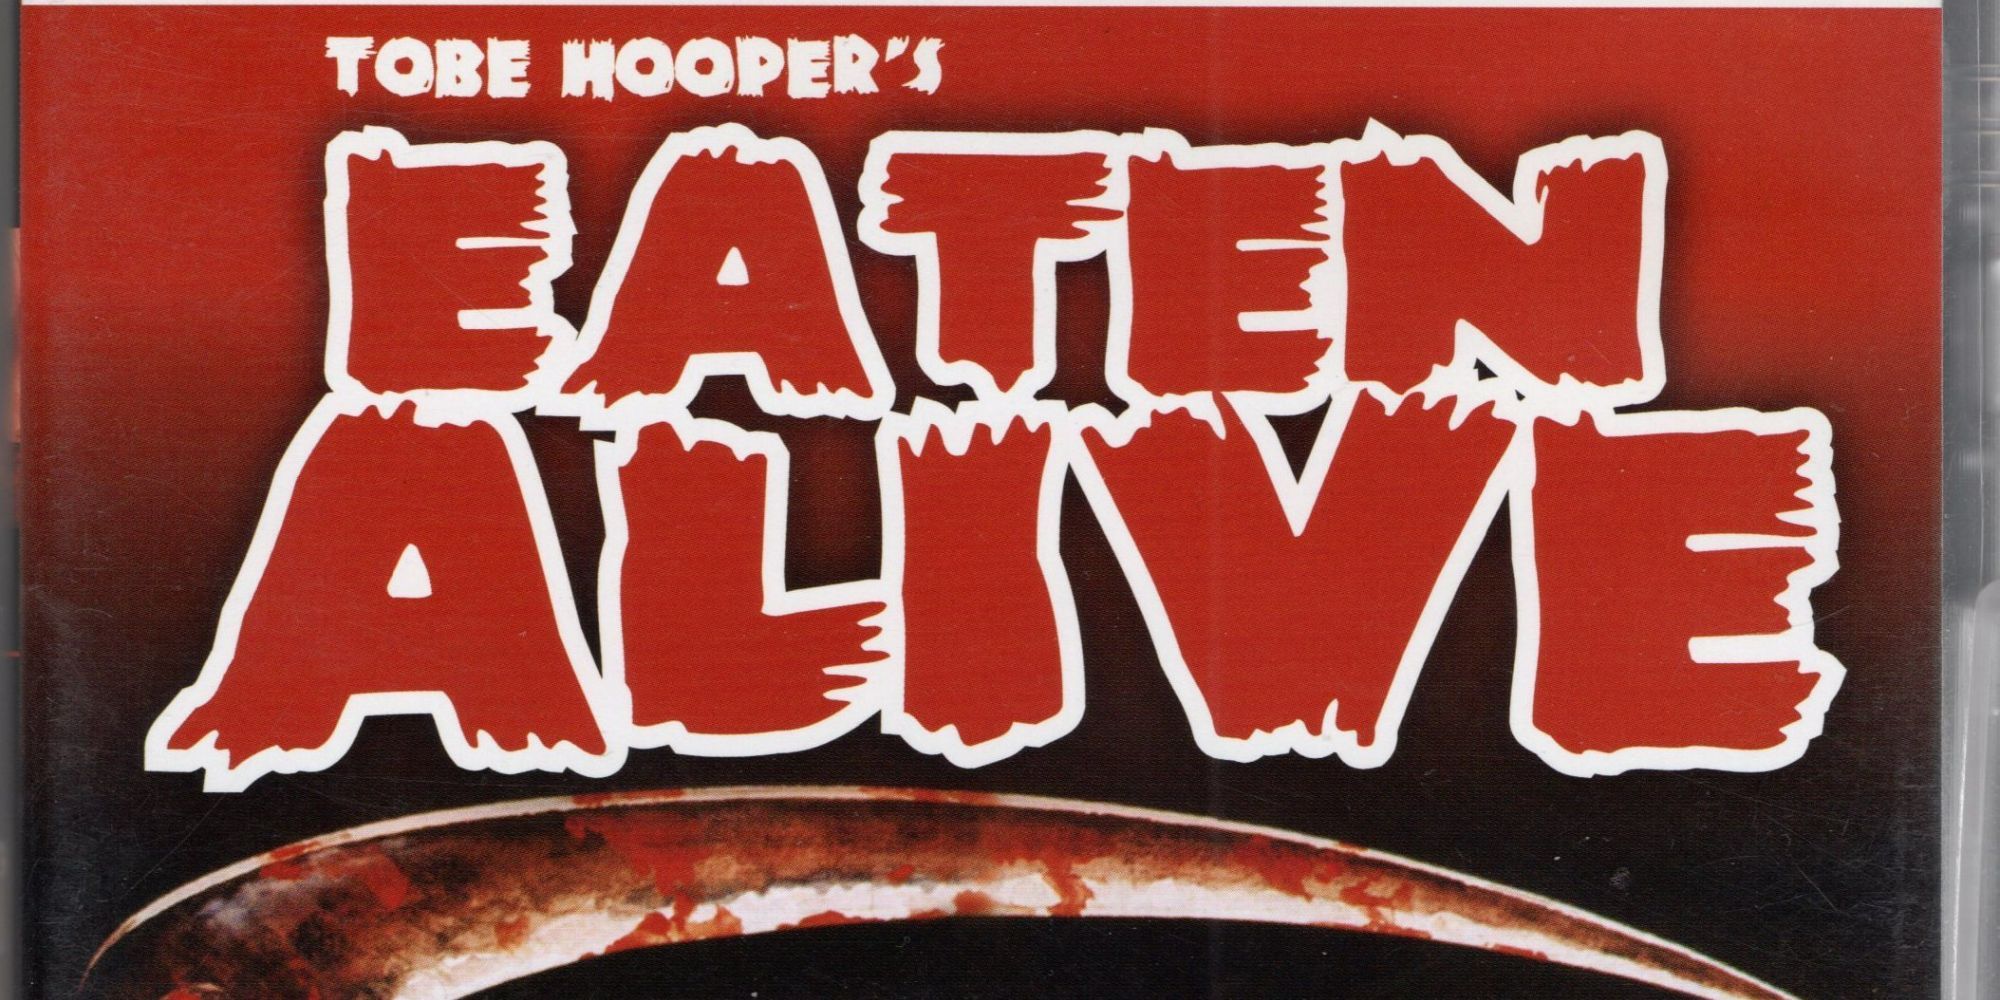 The theatrical poster for Eaten Alive featuring the title and a sickle